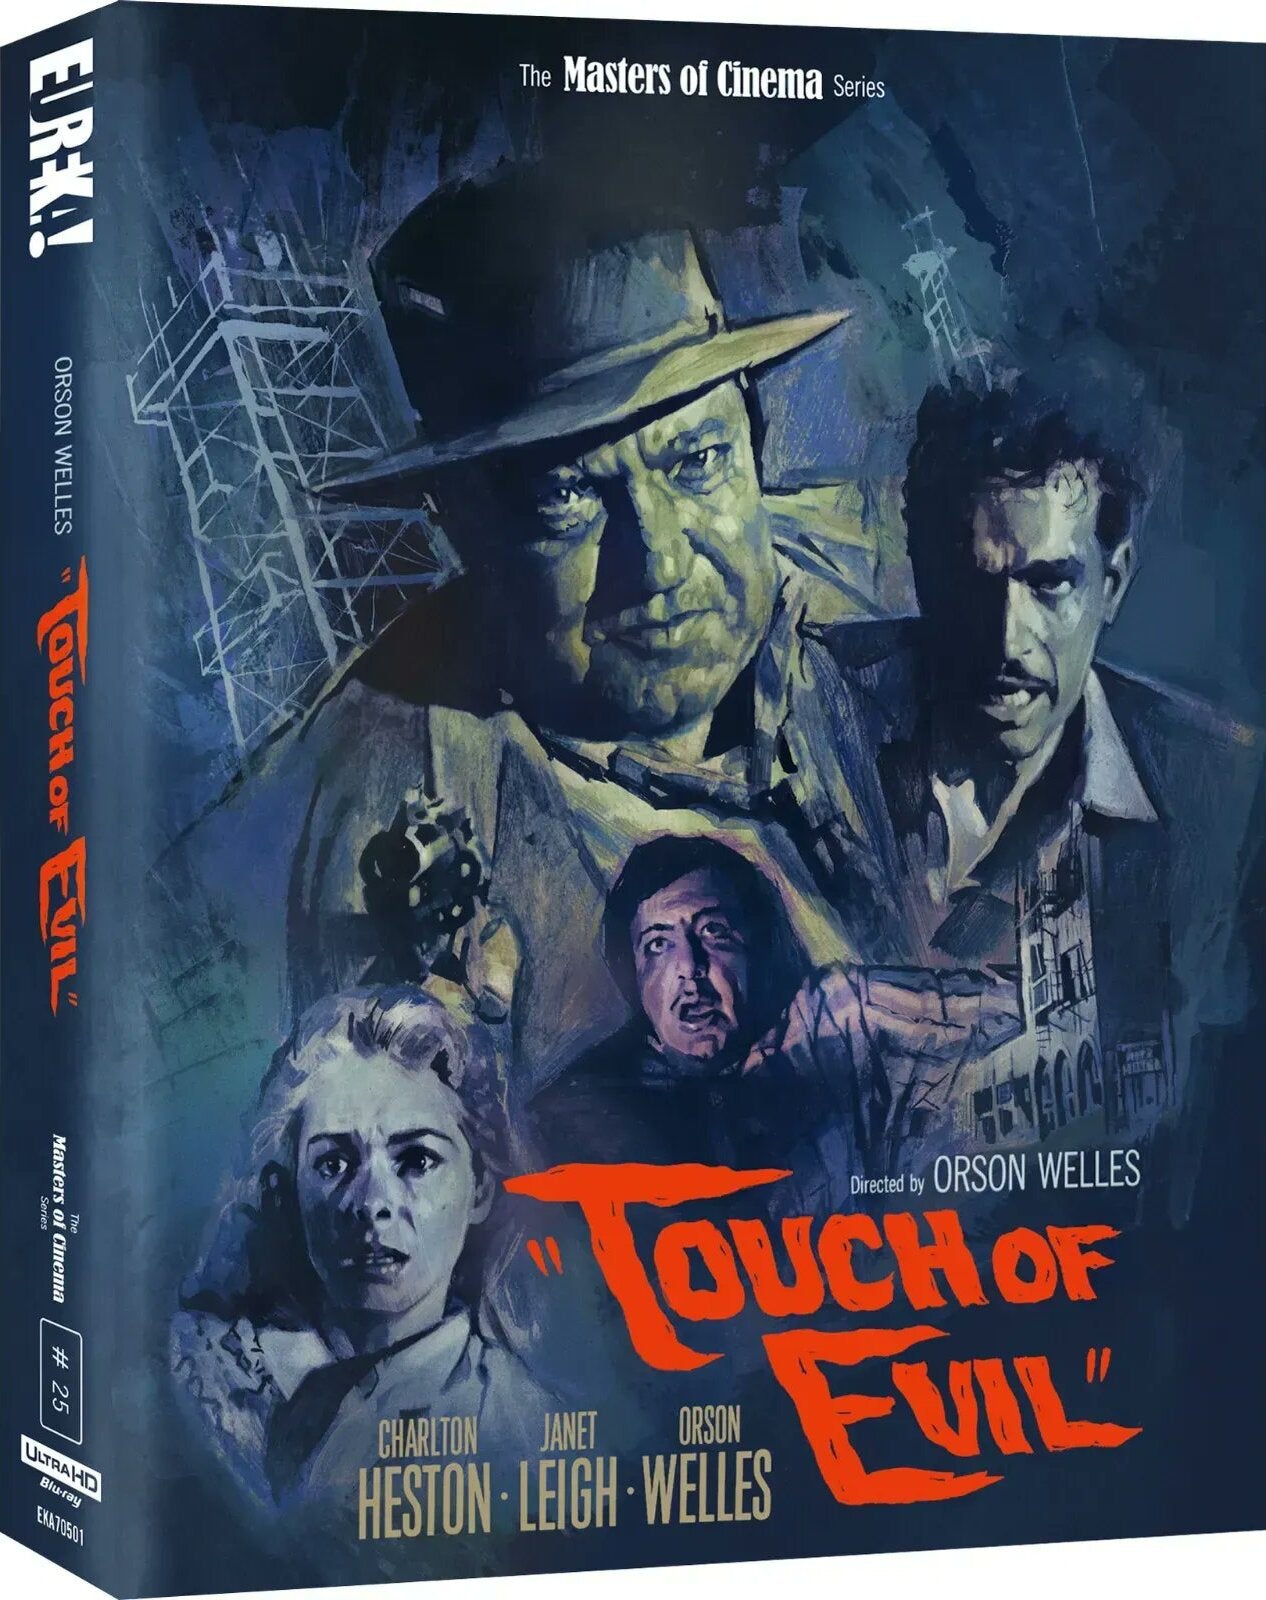 TOUCH OF EVIL (REGION FREE IMPORT - LIMITED EDITION) 4K UHD